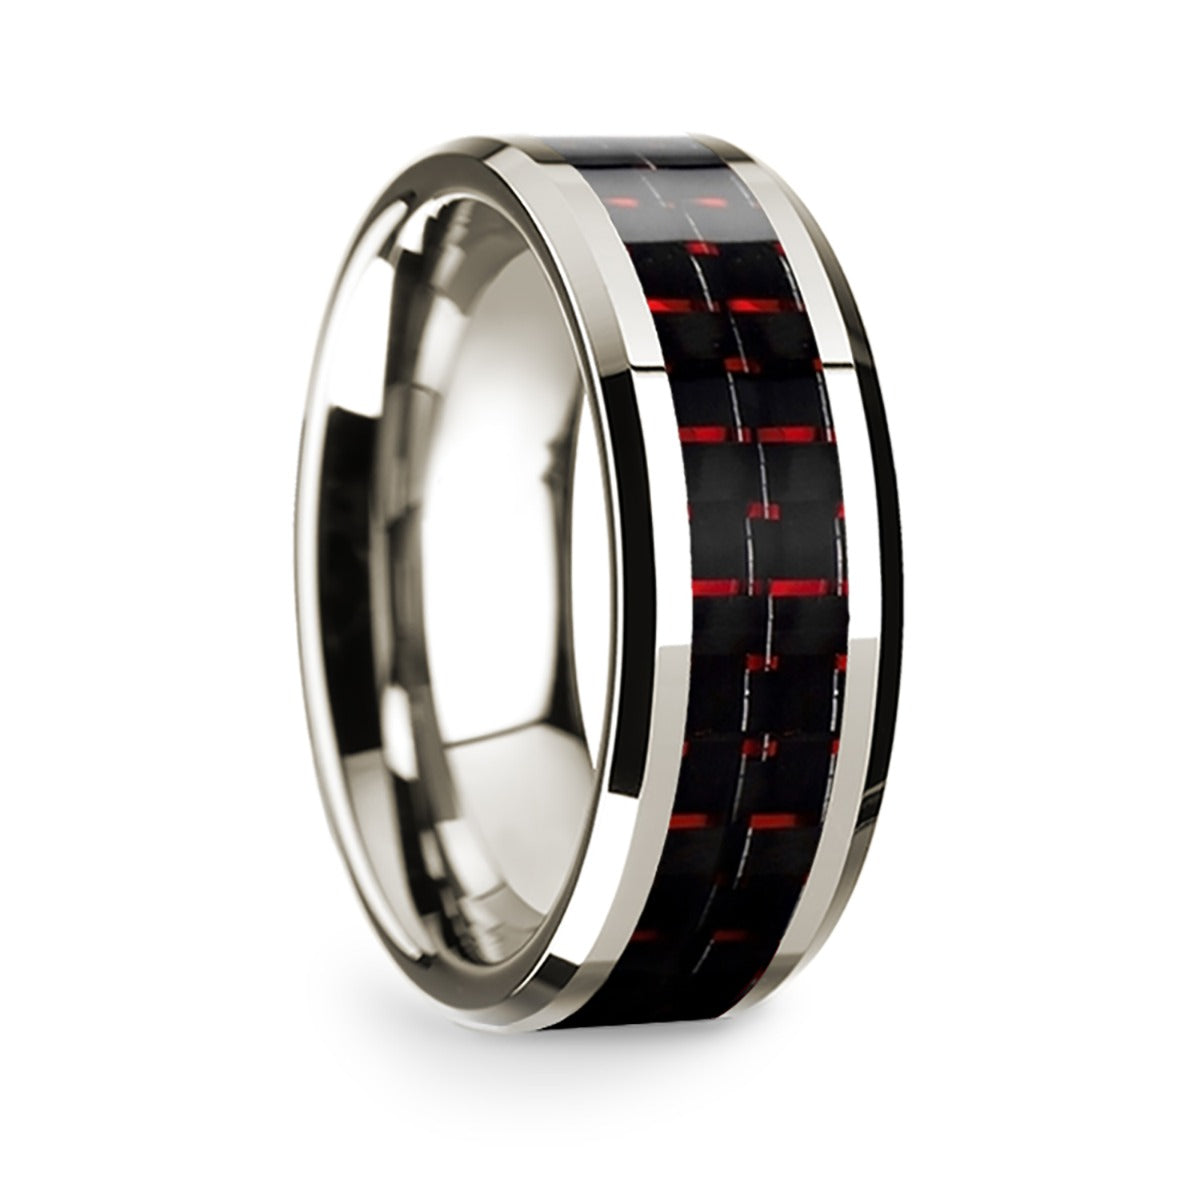 14k White Gold Men's Wedding Band with Black & Red Carbon Fiber Inlay